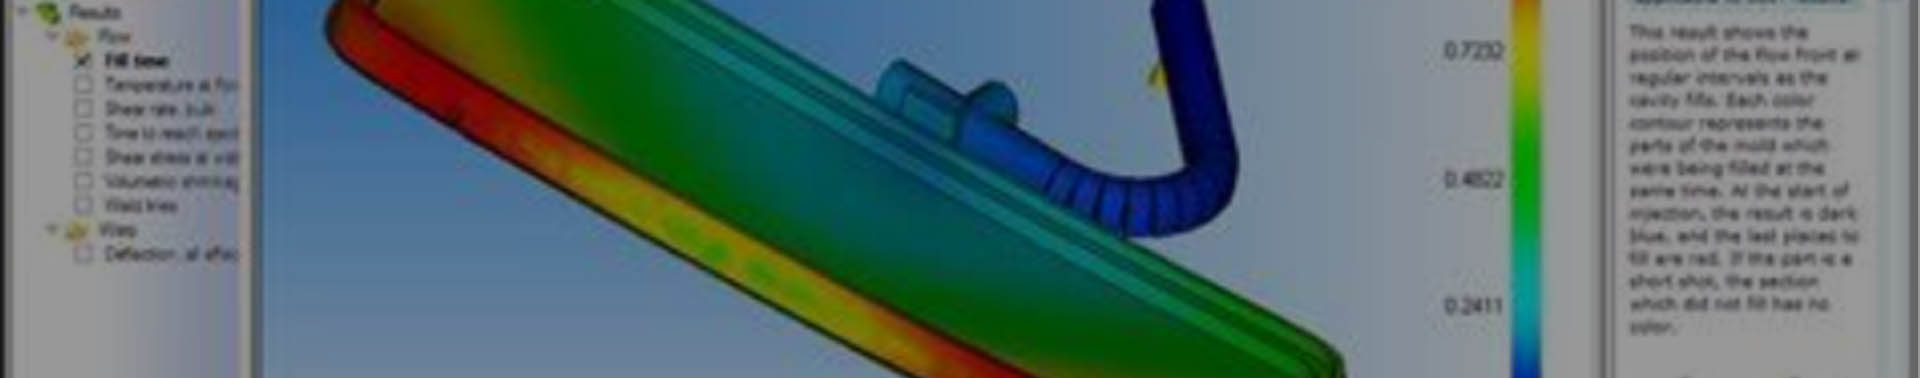 Moldflow analysis picture 1